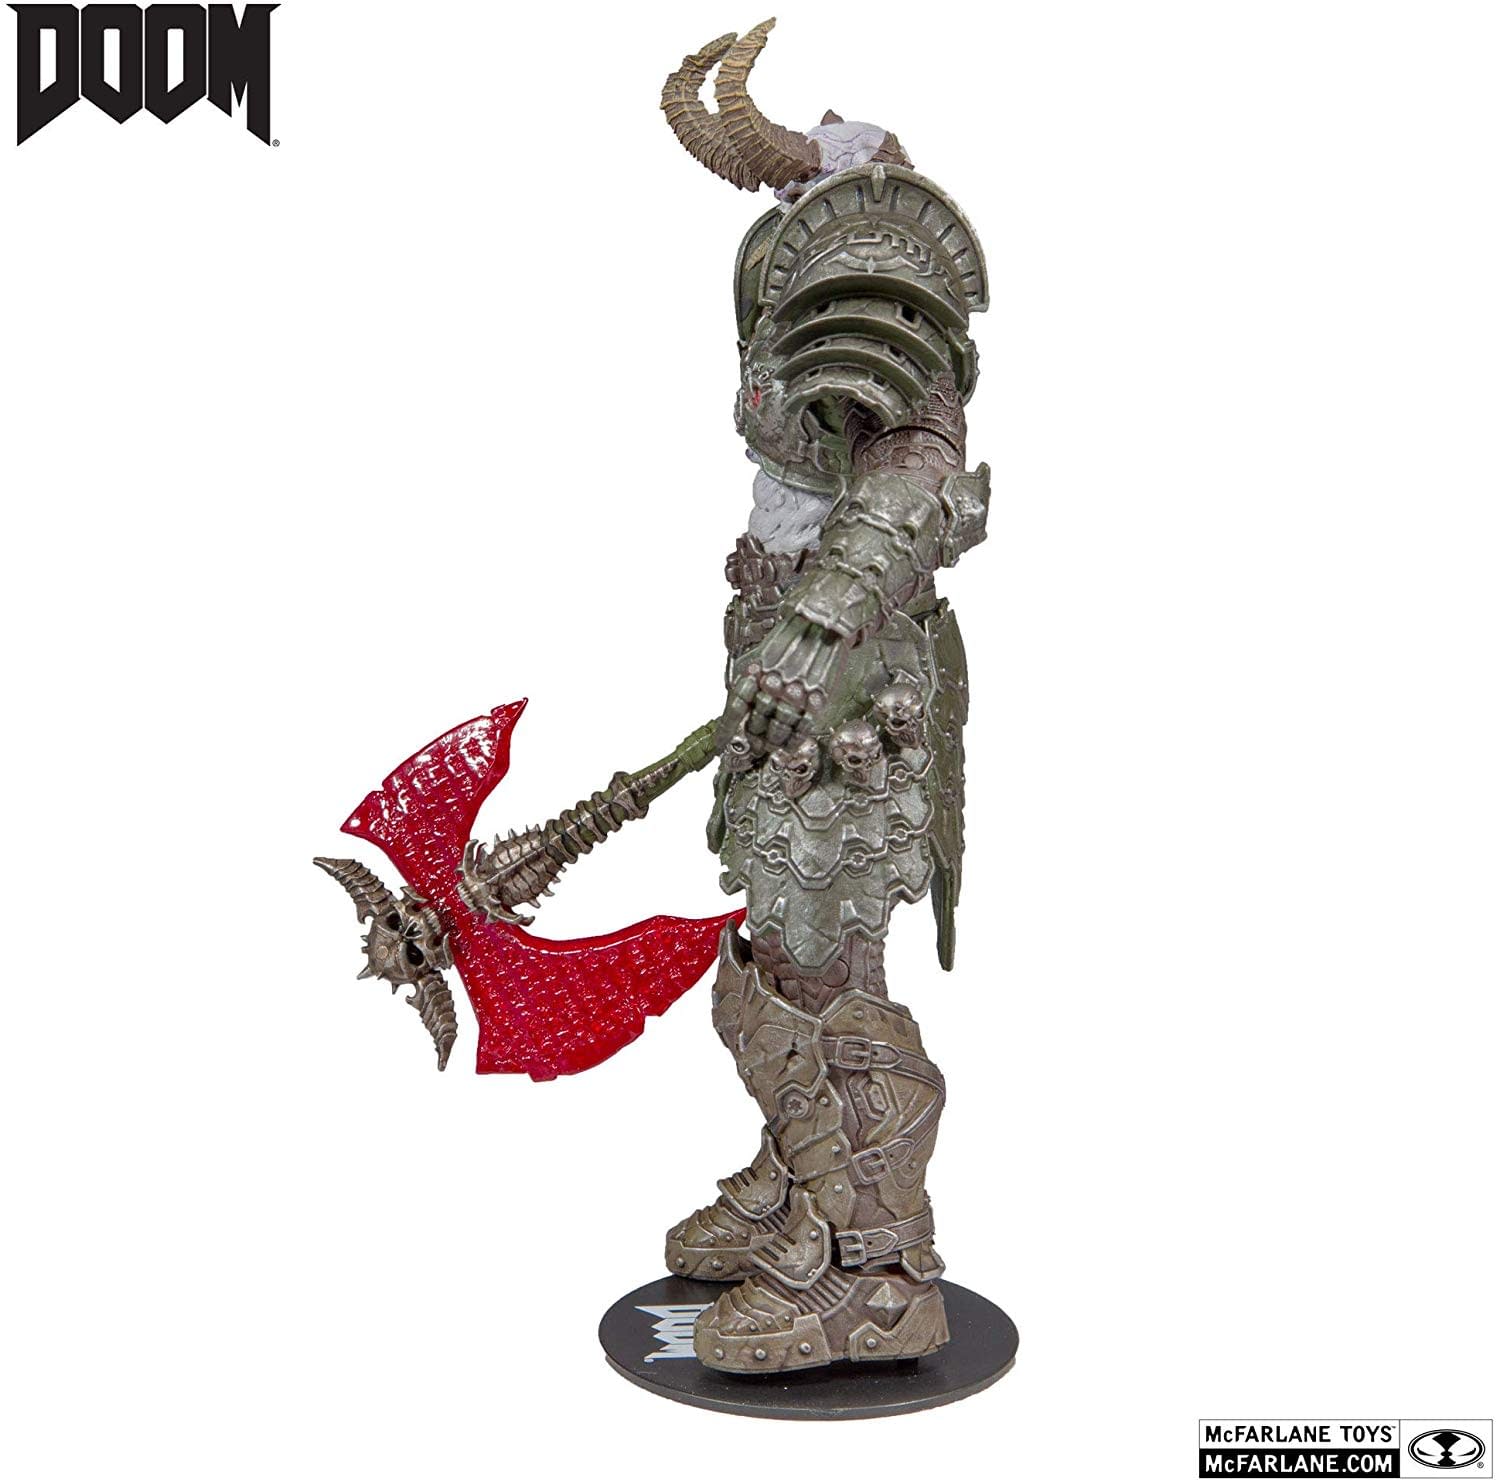 "Doom: Eternal" Gets Two New Figures from Hell with McFarlane Toys